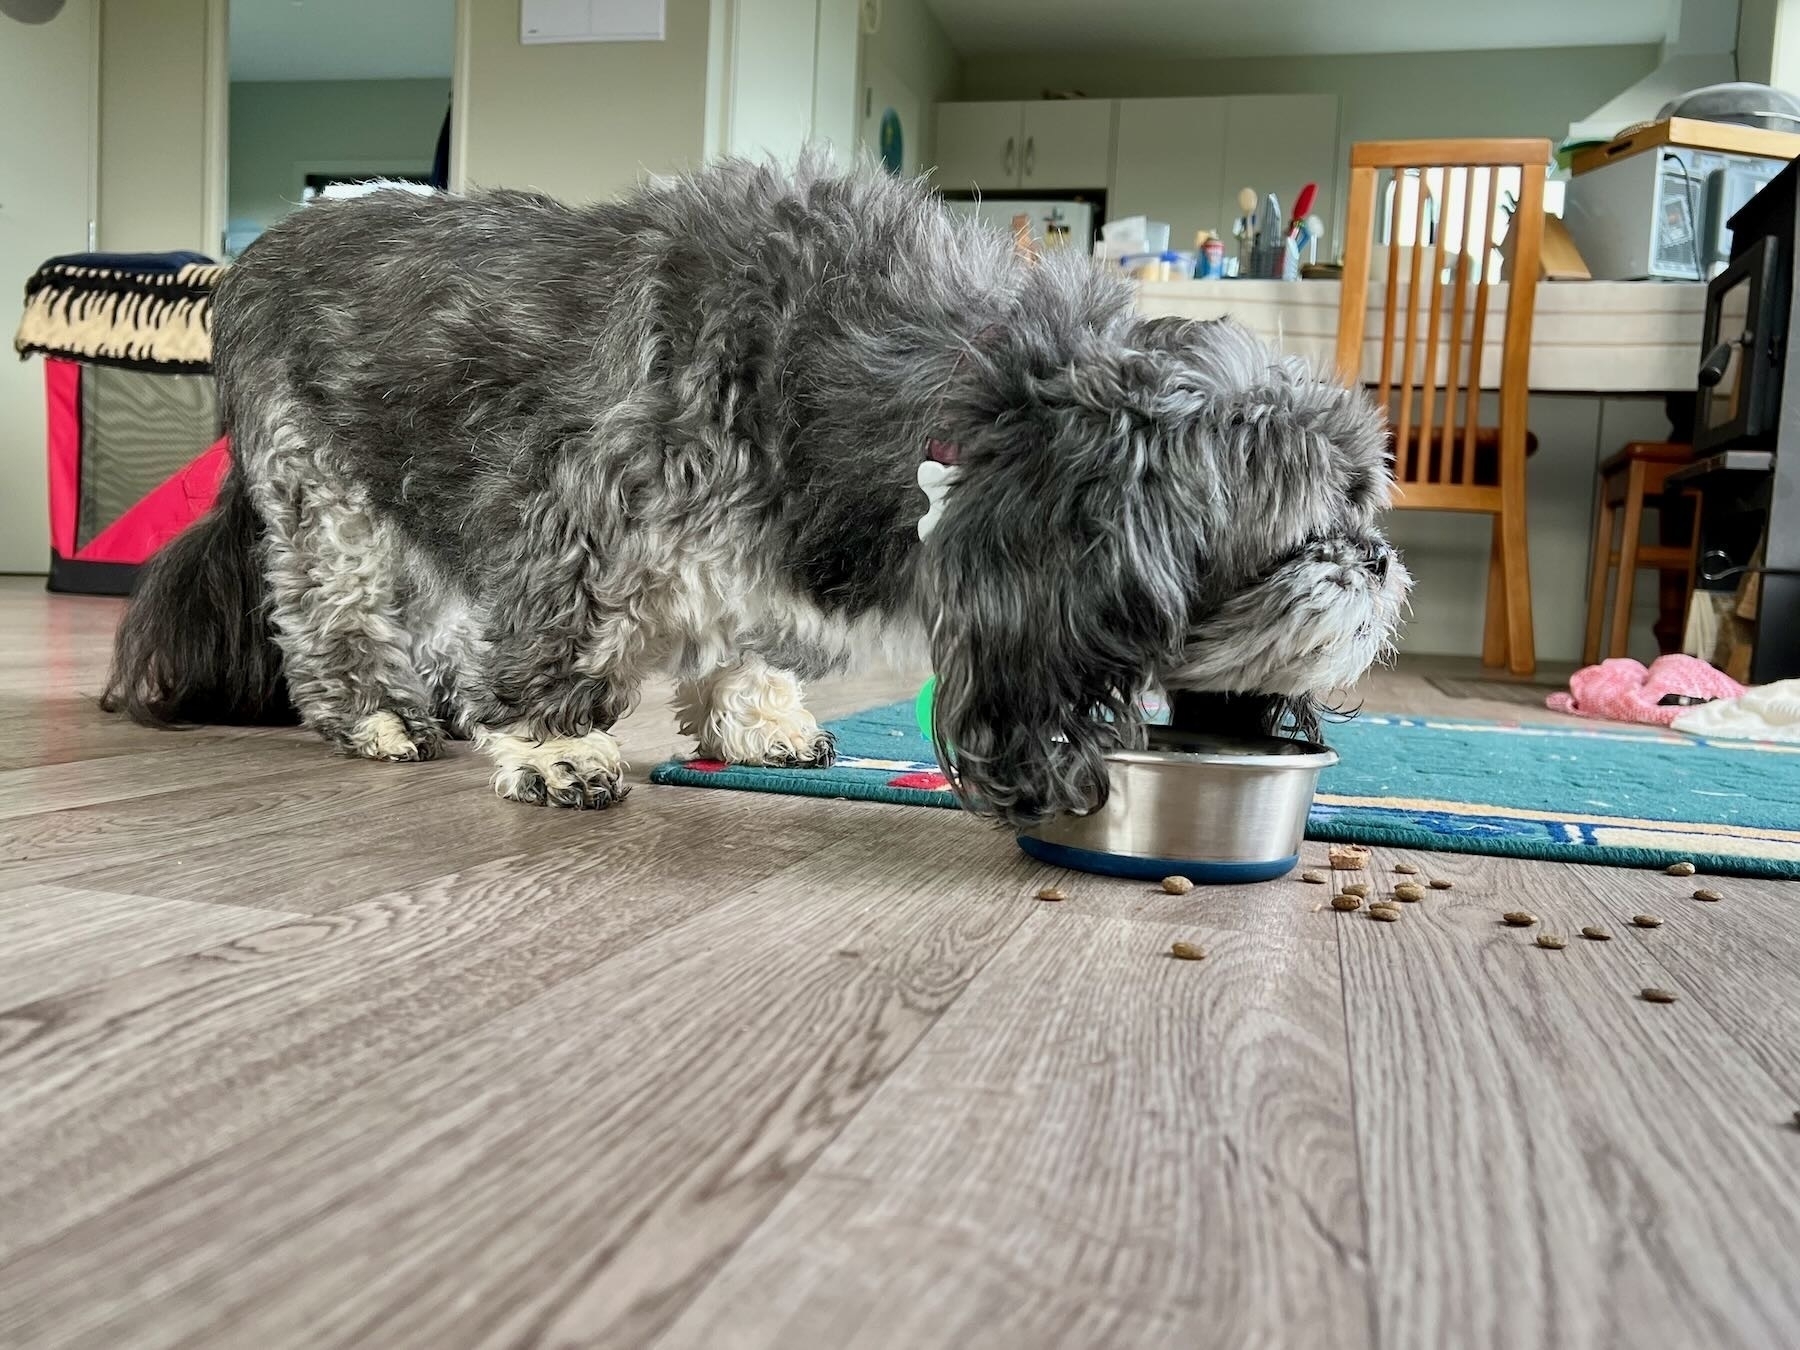 Small dog with lowered head over food bowl, with biscuits on the floor nearby. 